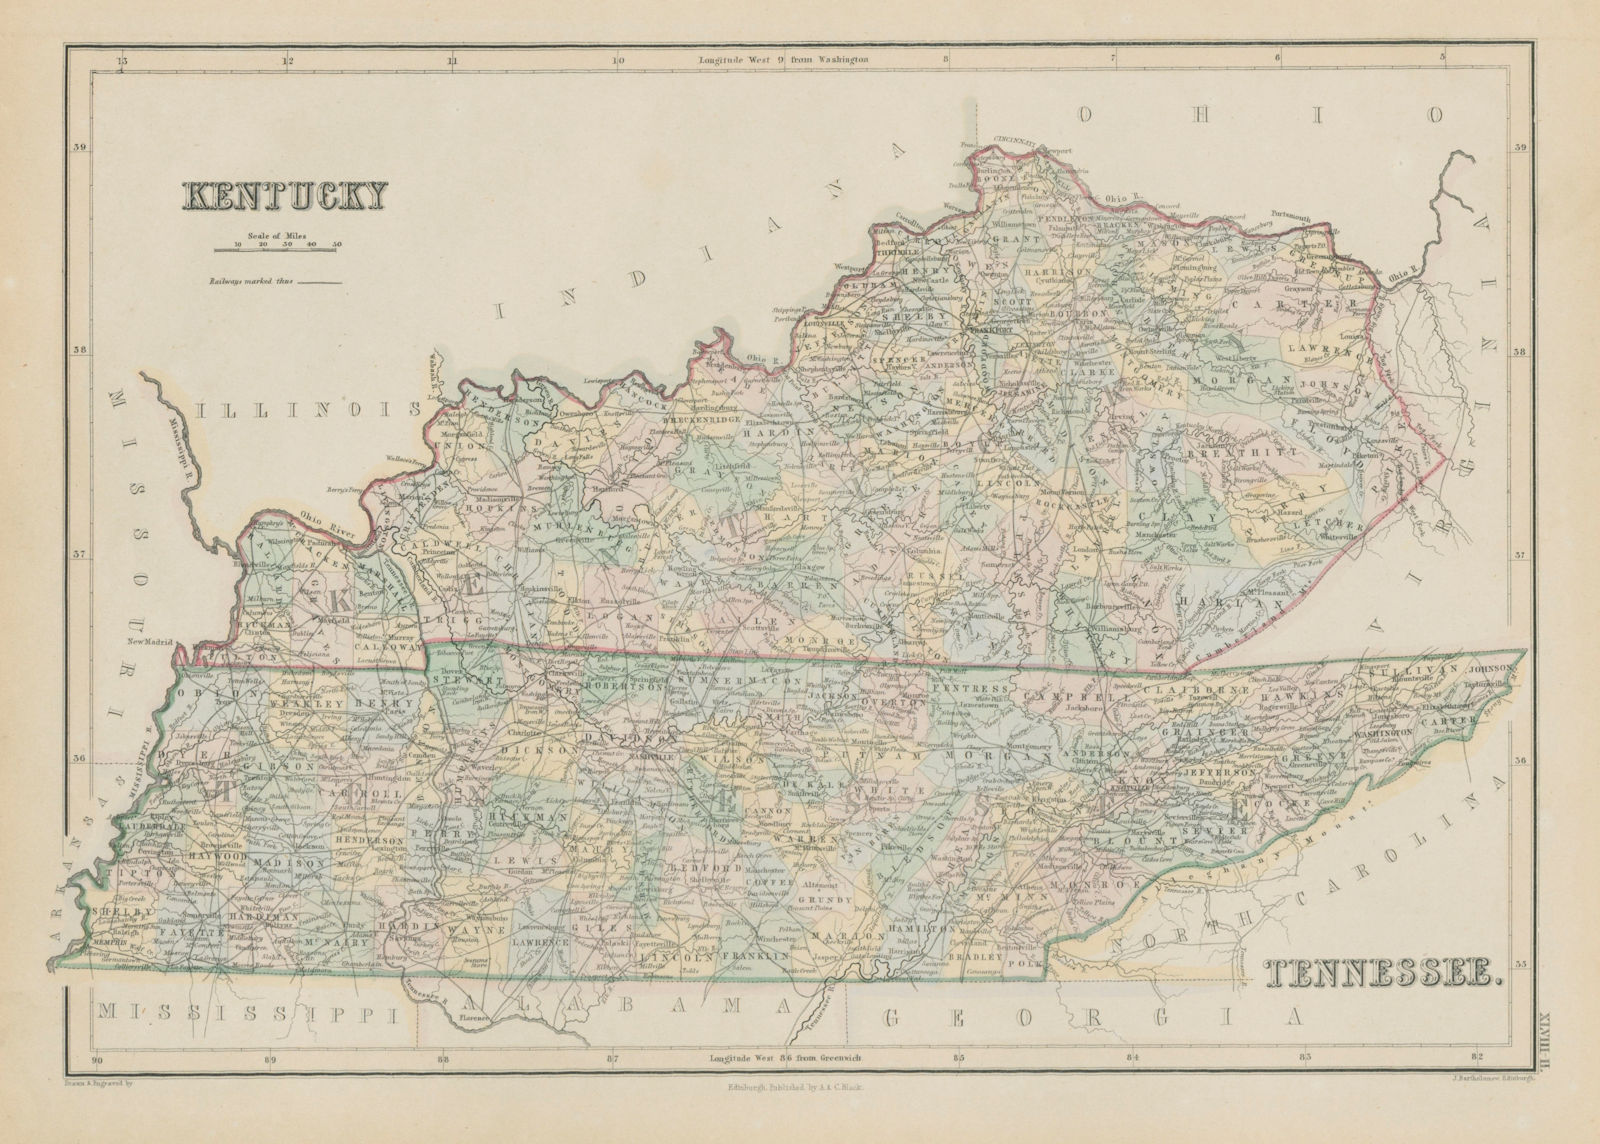 Kentucky & Tennessee state map showing counties. JOHN BARTHOLOMEW 1856 old